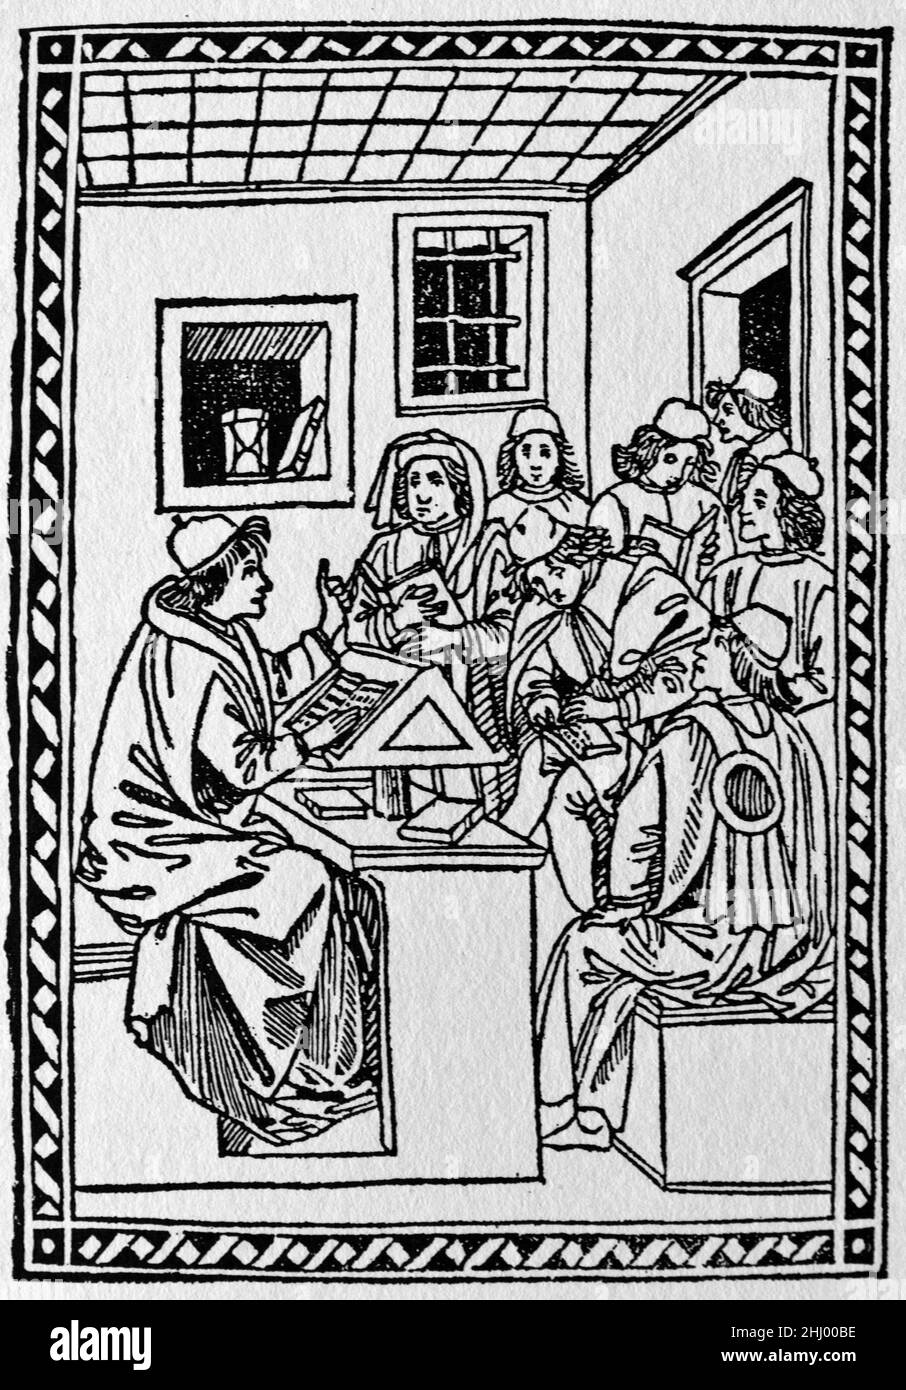 Cristoforo Landino (1442-1498) Italian Humanist during the Florentine Renaissance. Landino was a teacher and scholar at the Platonic Academy and scriptor of public letters for the Signoria Florence Italy. c15th Woodcut Print, Engraving or Illustration. Stock Photo